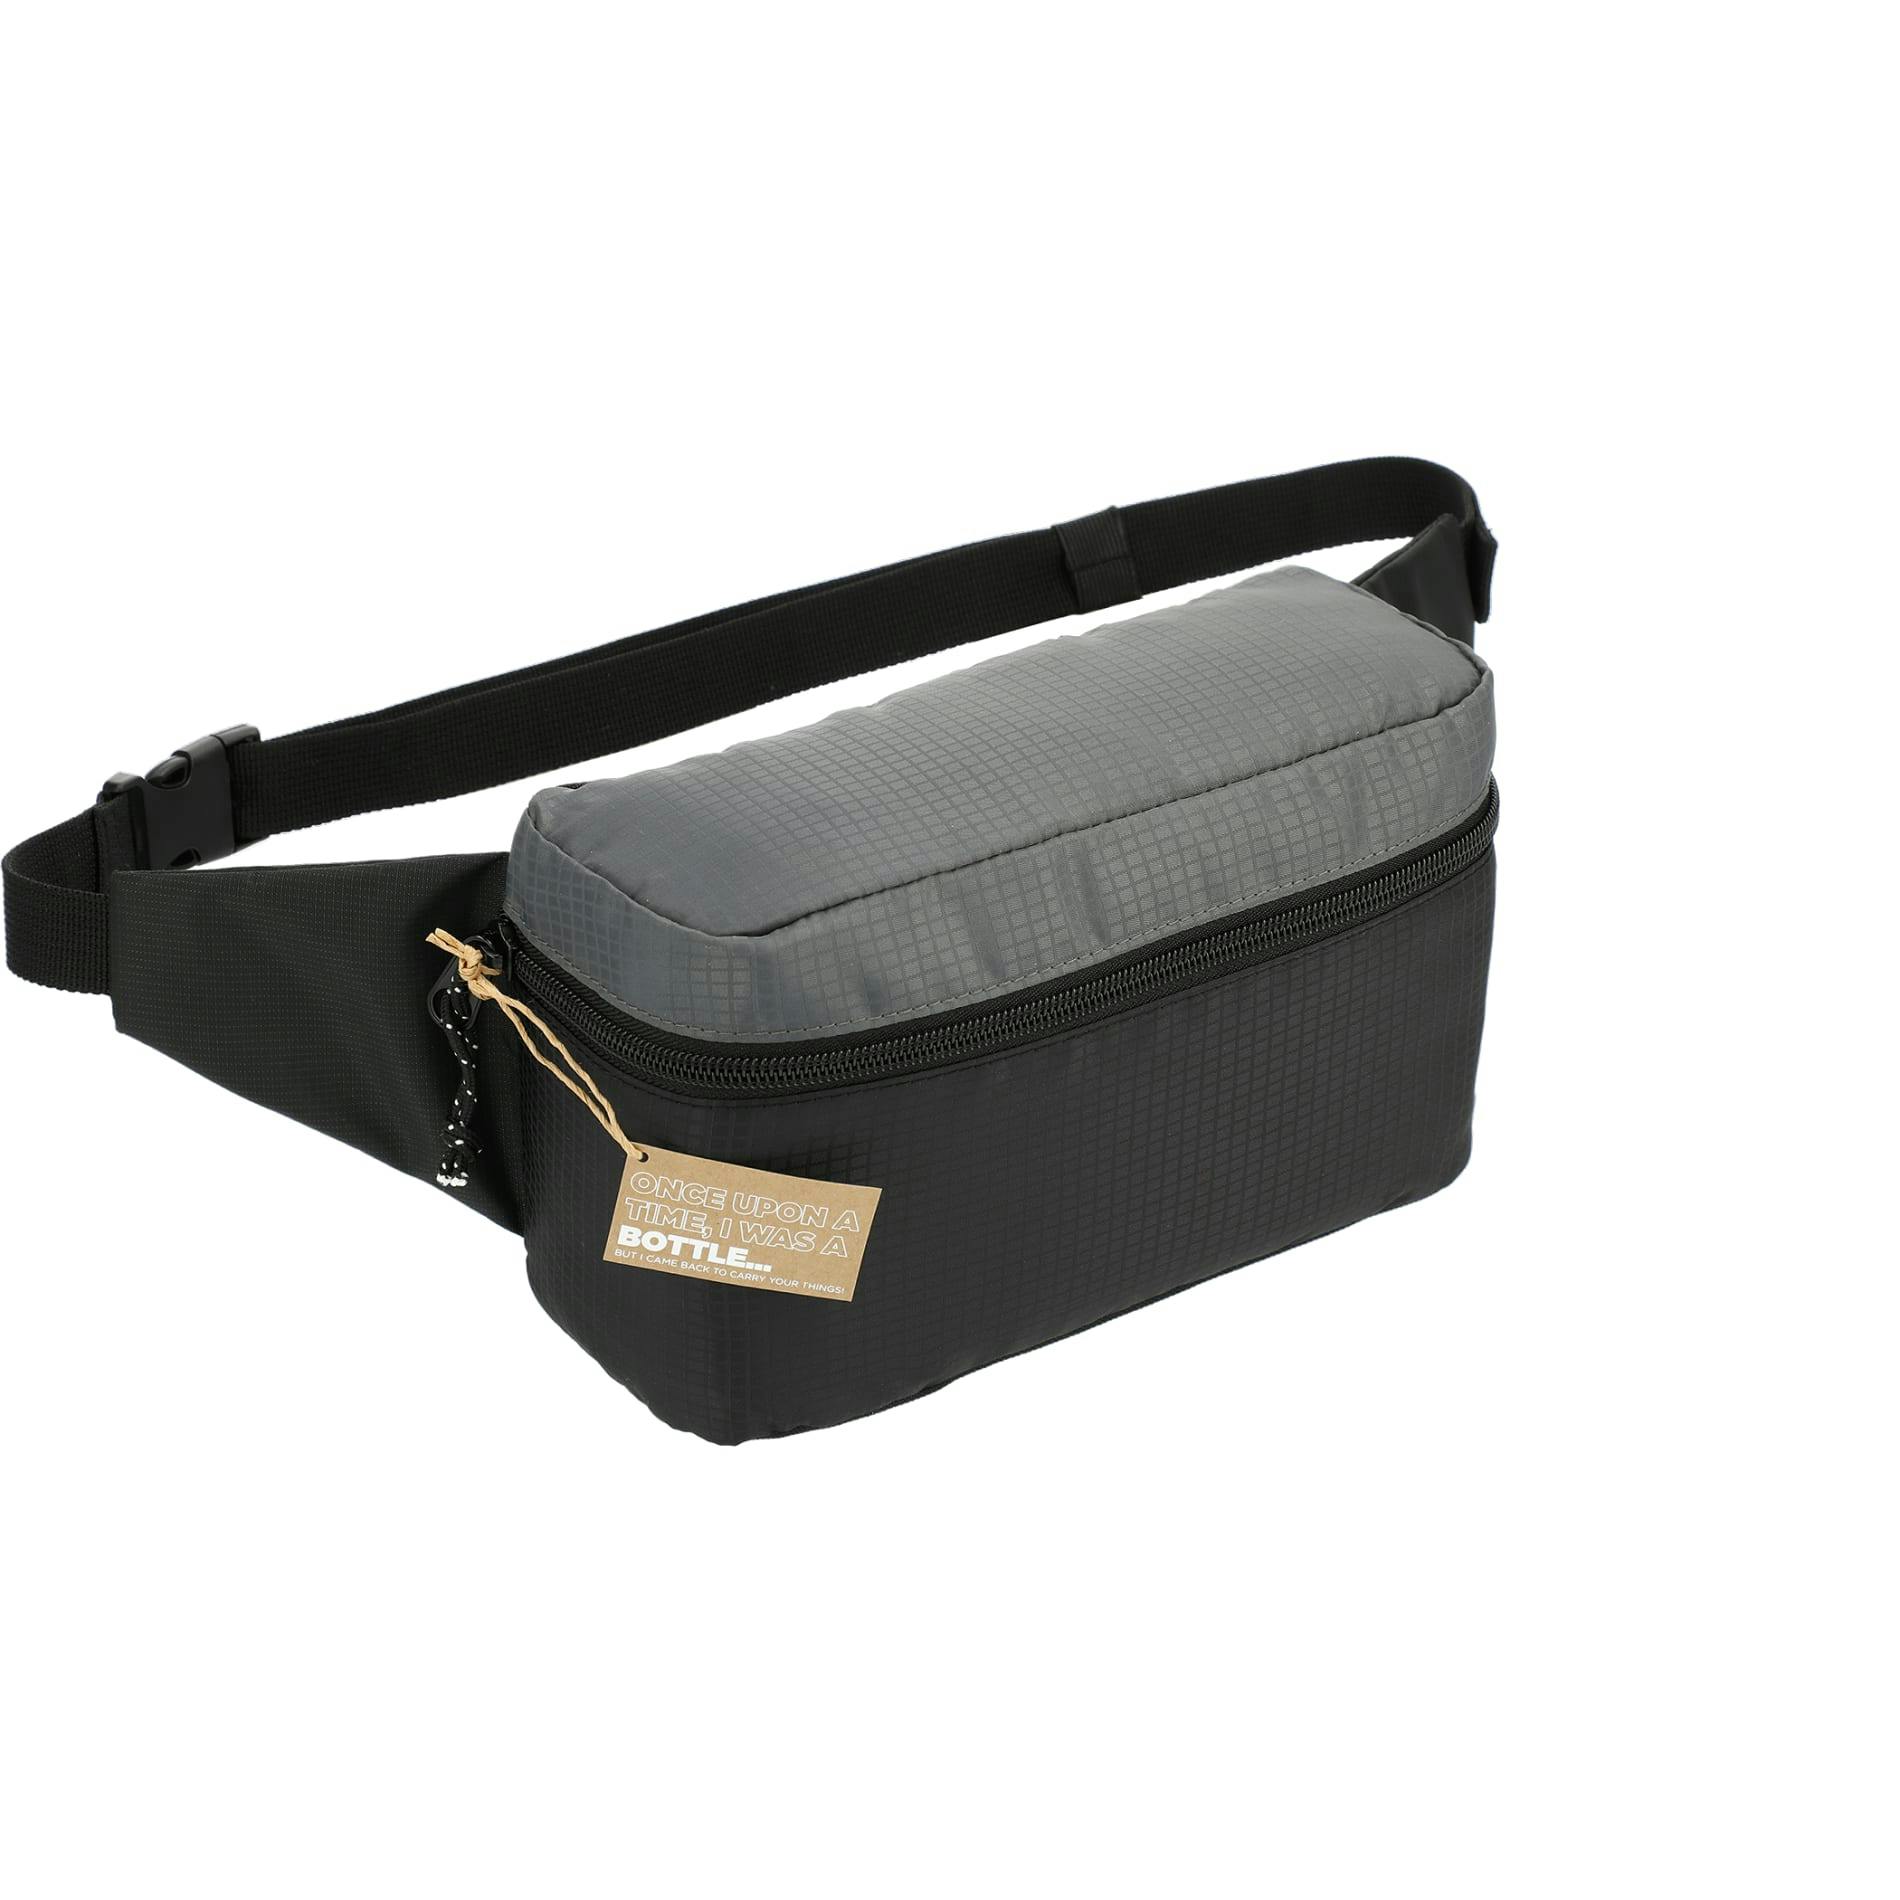 NBN Trailhead Recycled Fanny Pack - additional Image 3